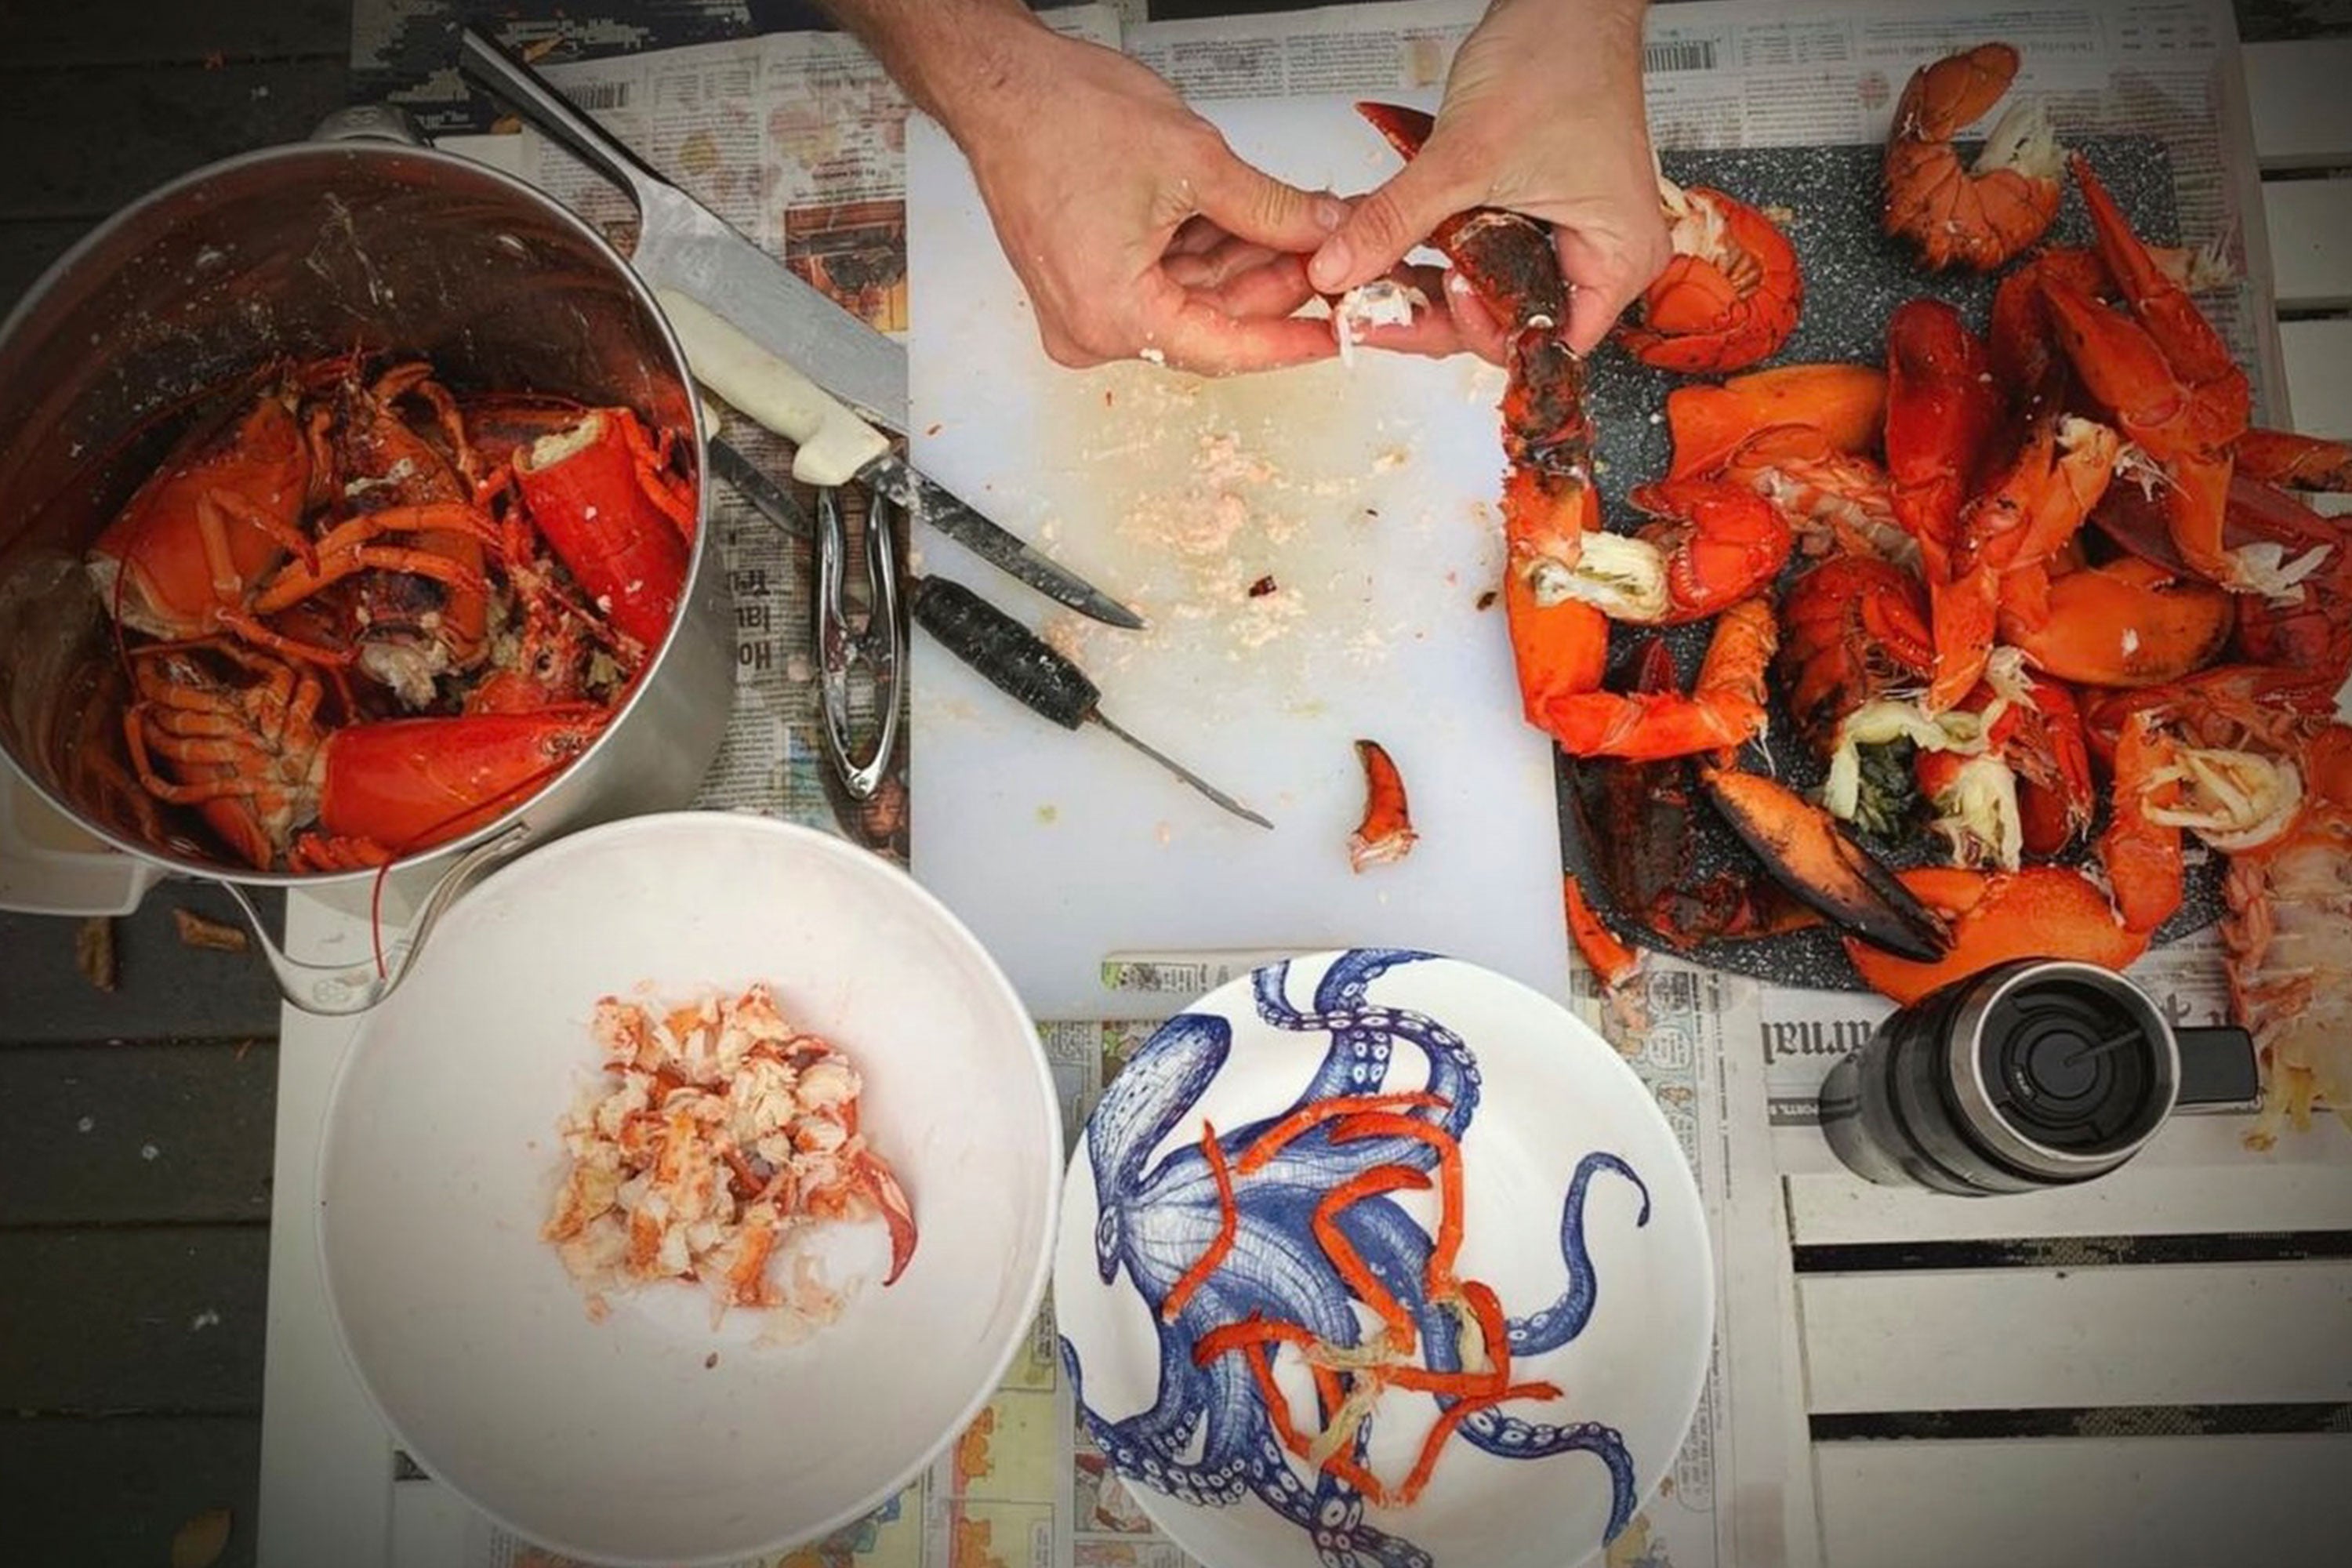 Above view of lobster casserole being prepared on a table with knives, plates, a chopping board and pan visible